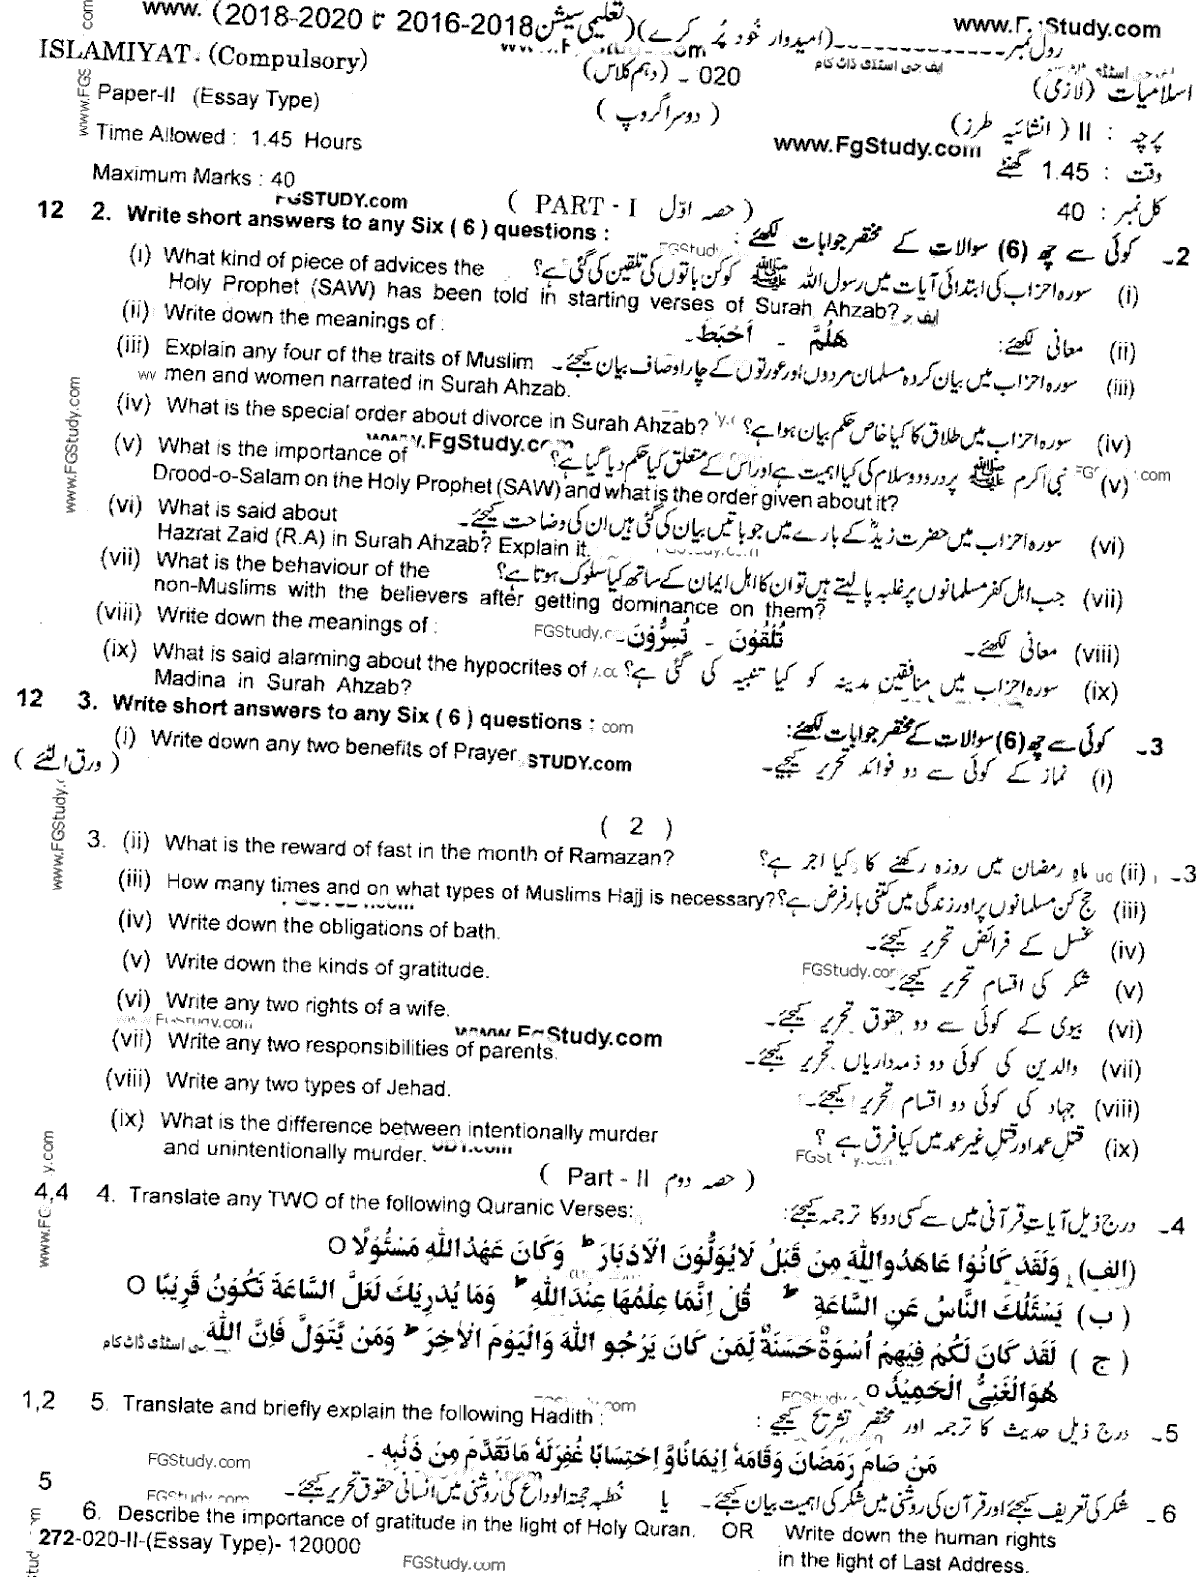 Islamiat Compulsory Group 2 subjective 10th Class Past Papers 2020